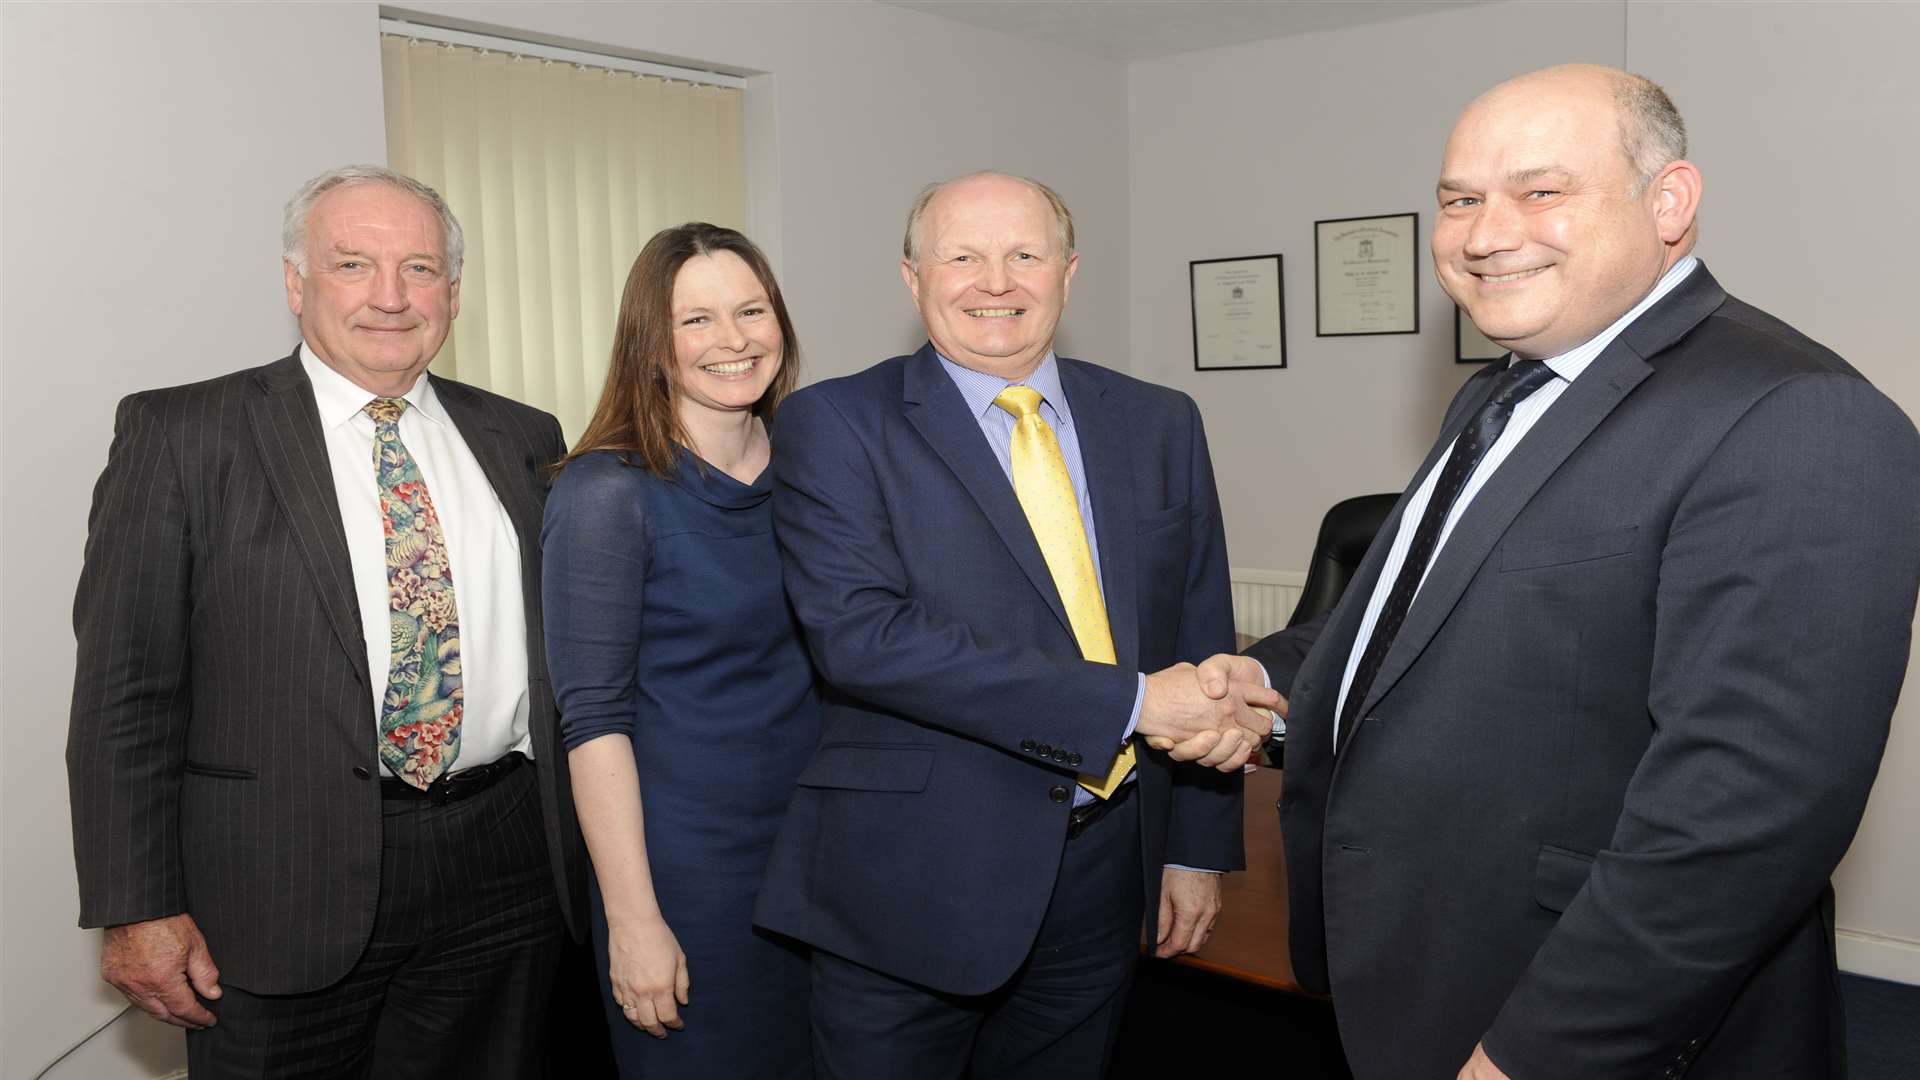 Tony Amlot, Claire Parry, Nigel Cripps and Rob Reynolds celebrate Lakin Clark's merger with Wilkins Kennedy